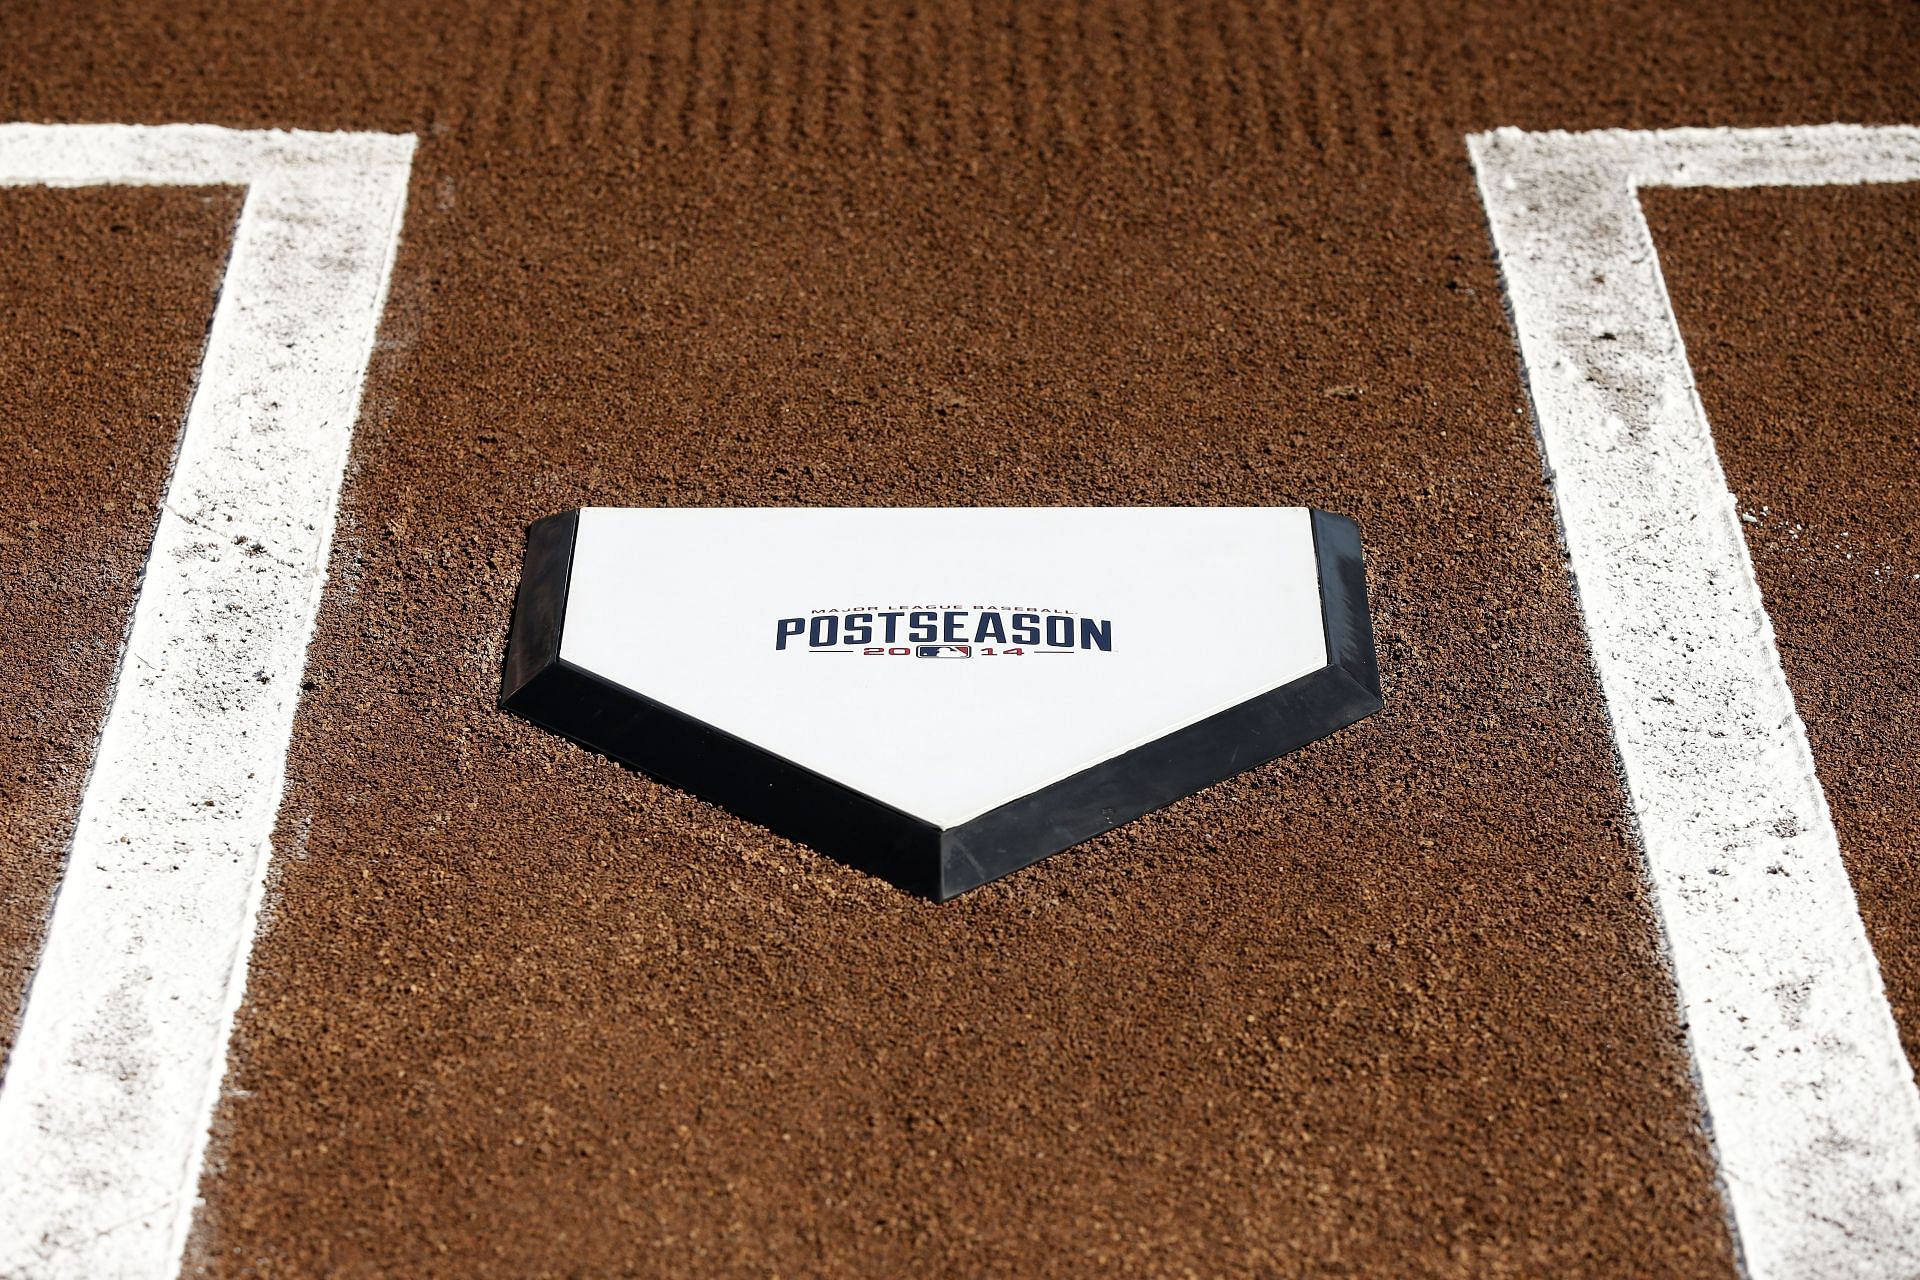 The MLB Postseason will now include a total of 12 teams